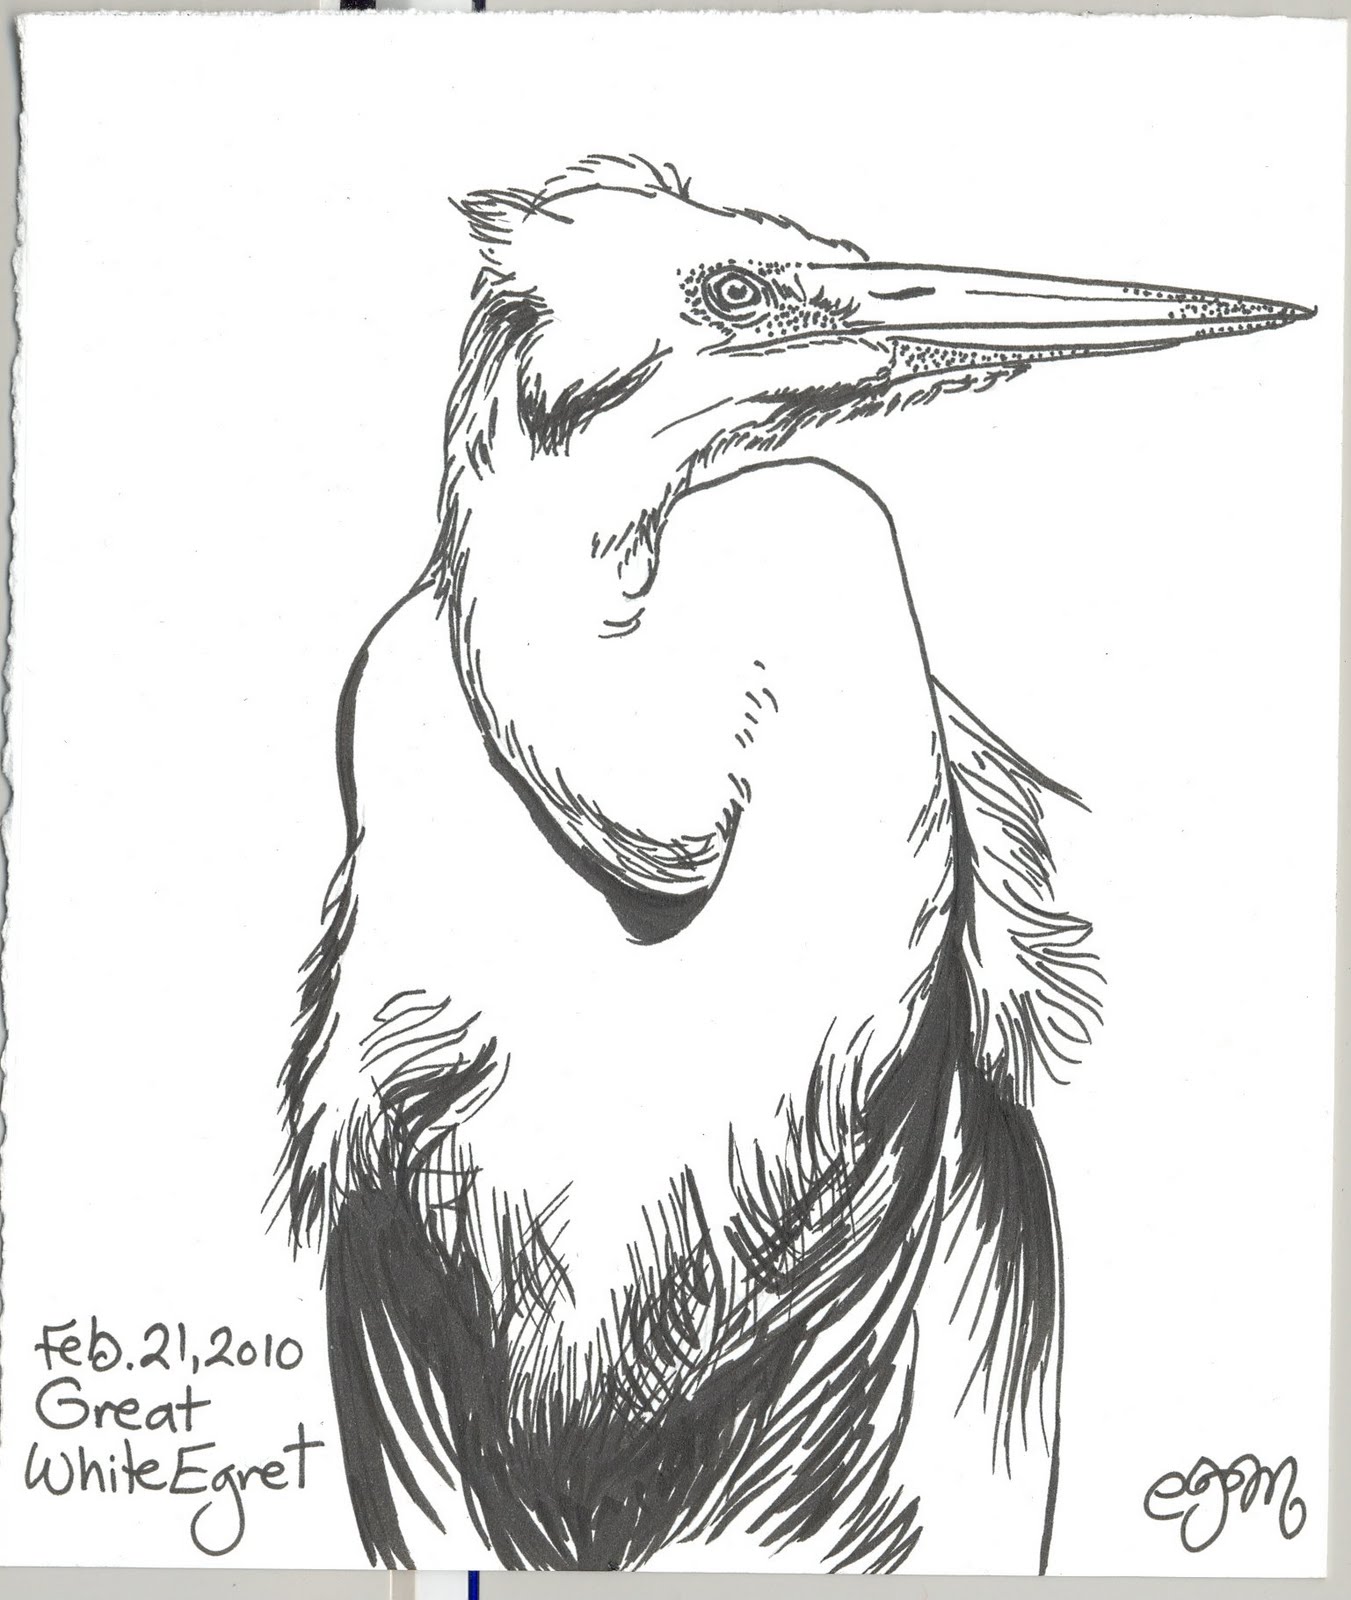 Claire scribbles: Great White Egret